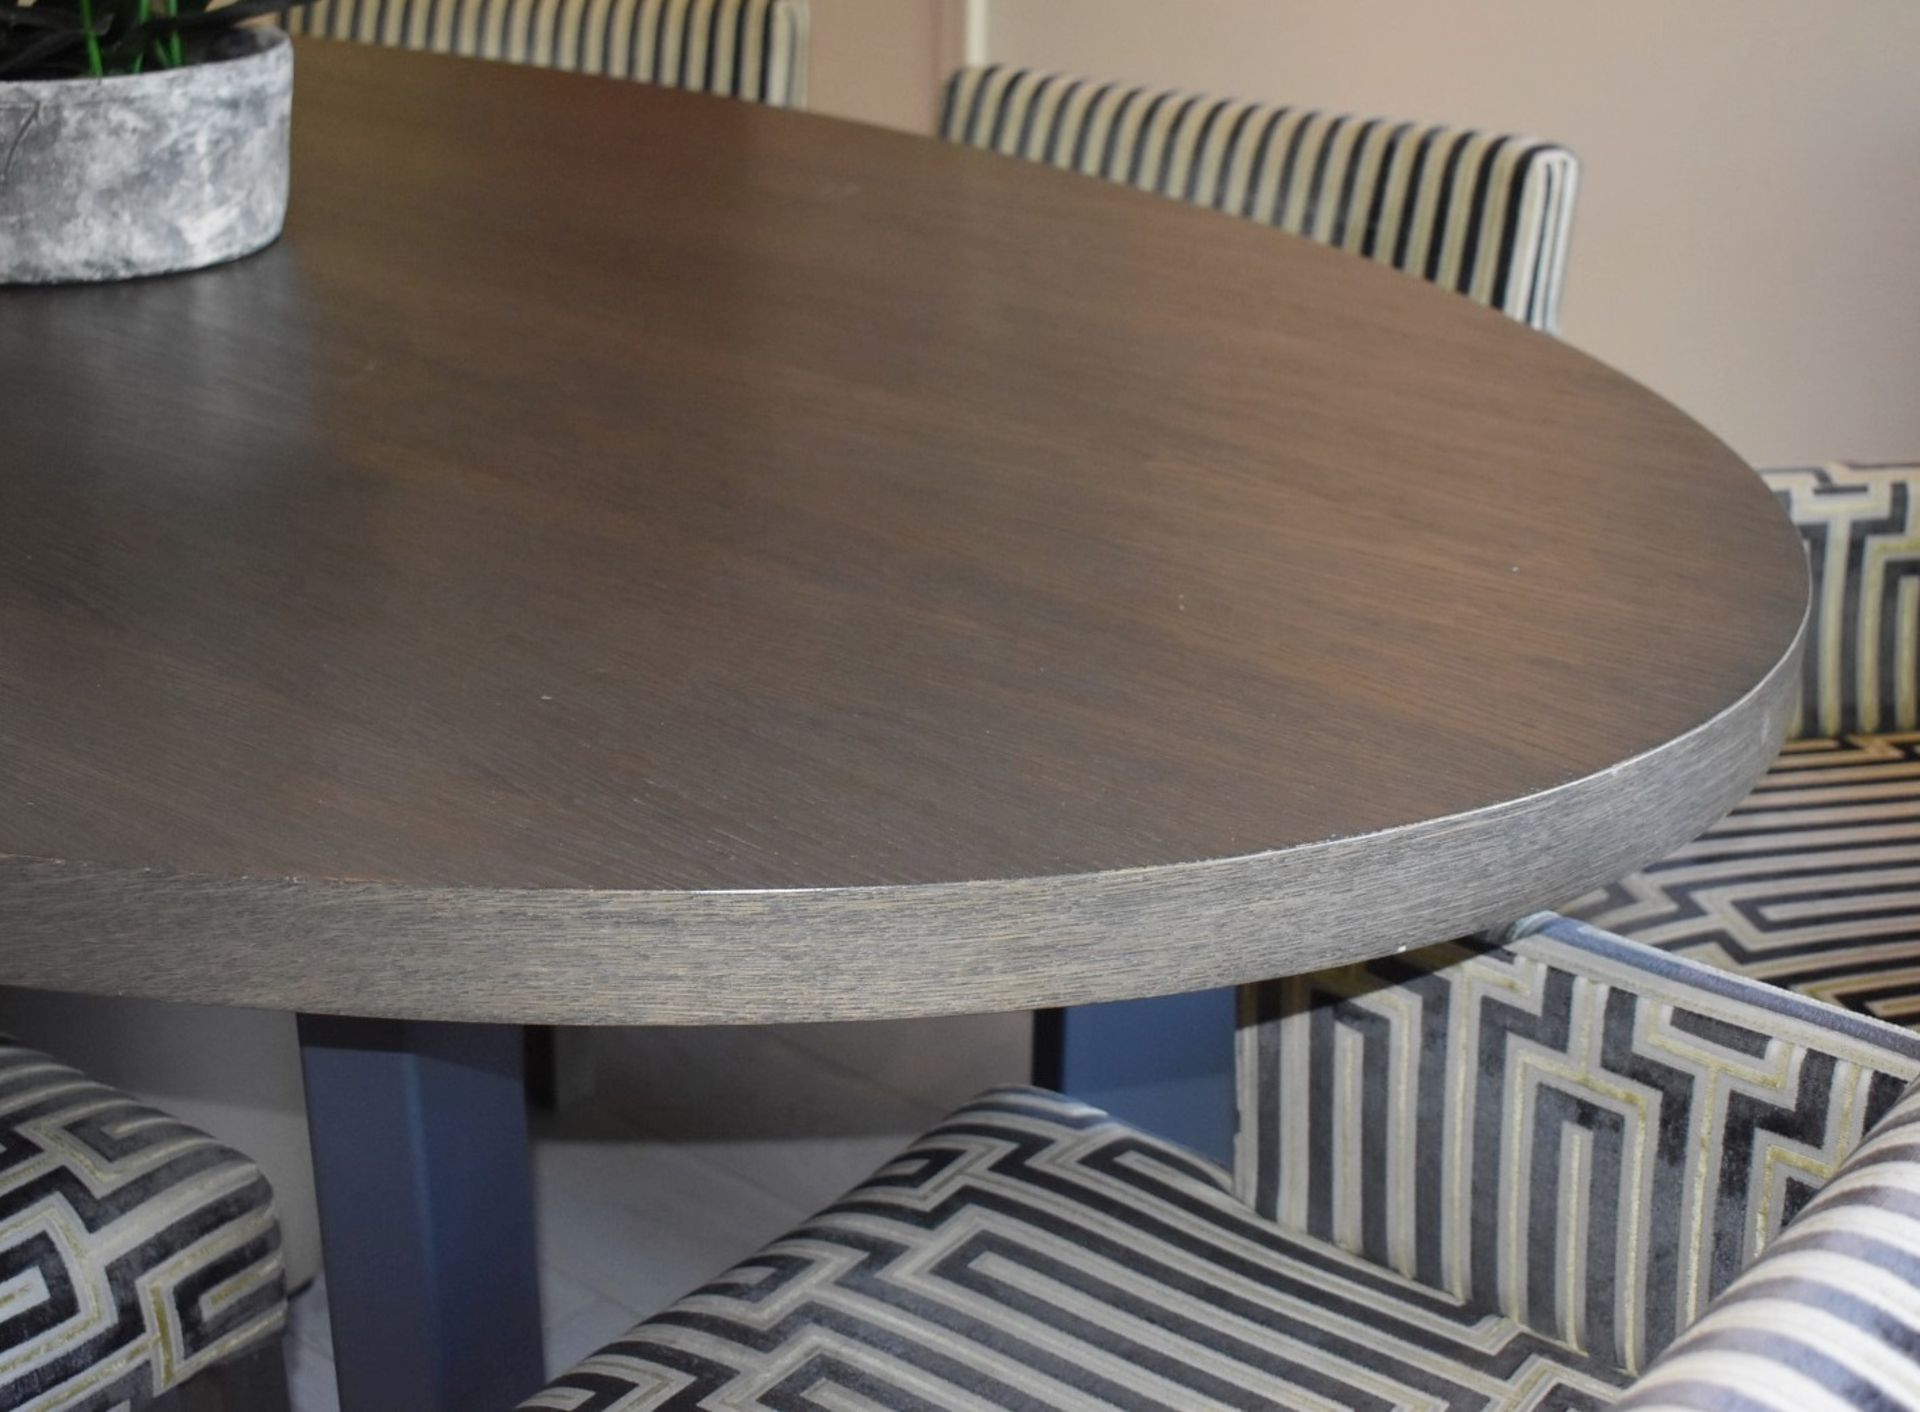 1 x Oval Dining Table With A Limed Oak Finish And Metal Legs - Image 3 of 5